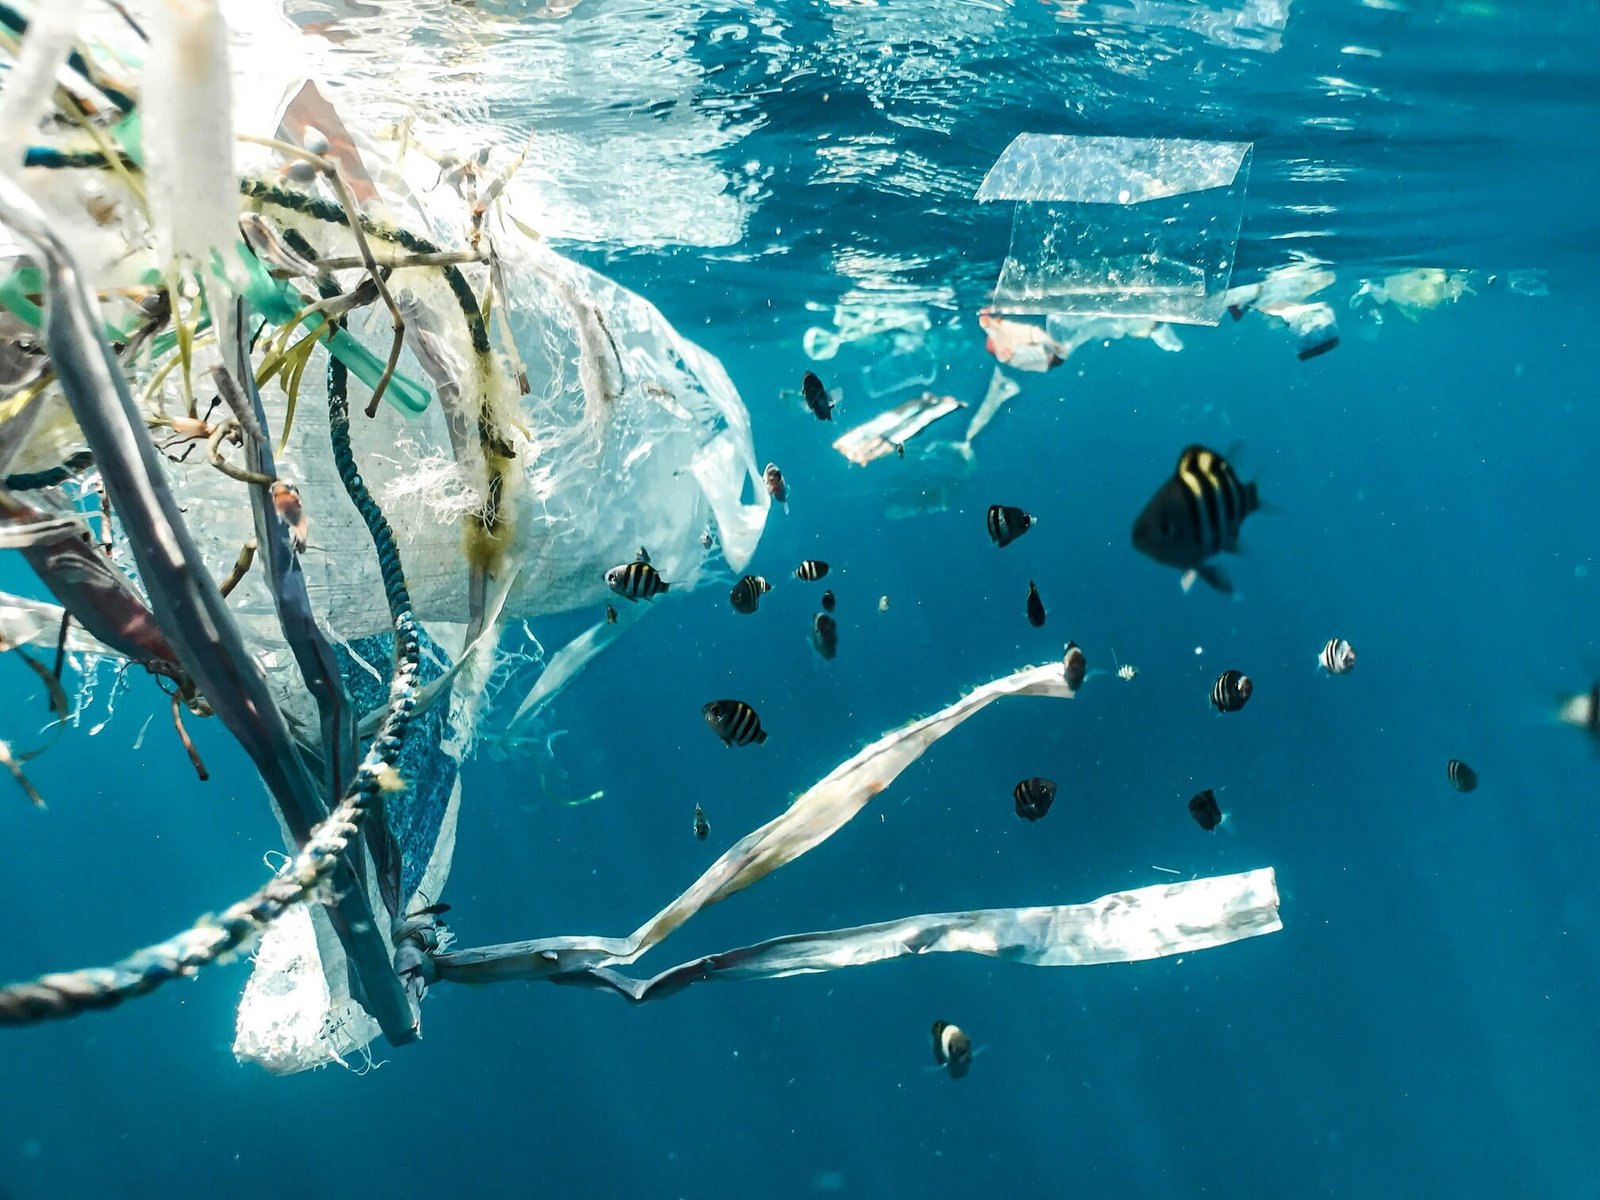 Fishing crews to blame for much of the plastic in the world's oceans,  Greenpeace says